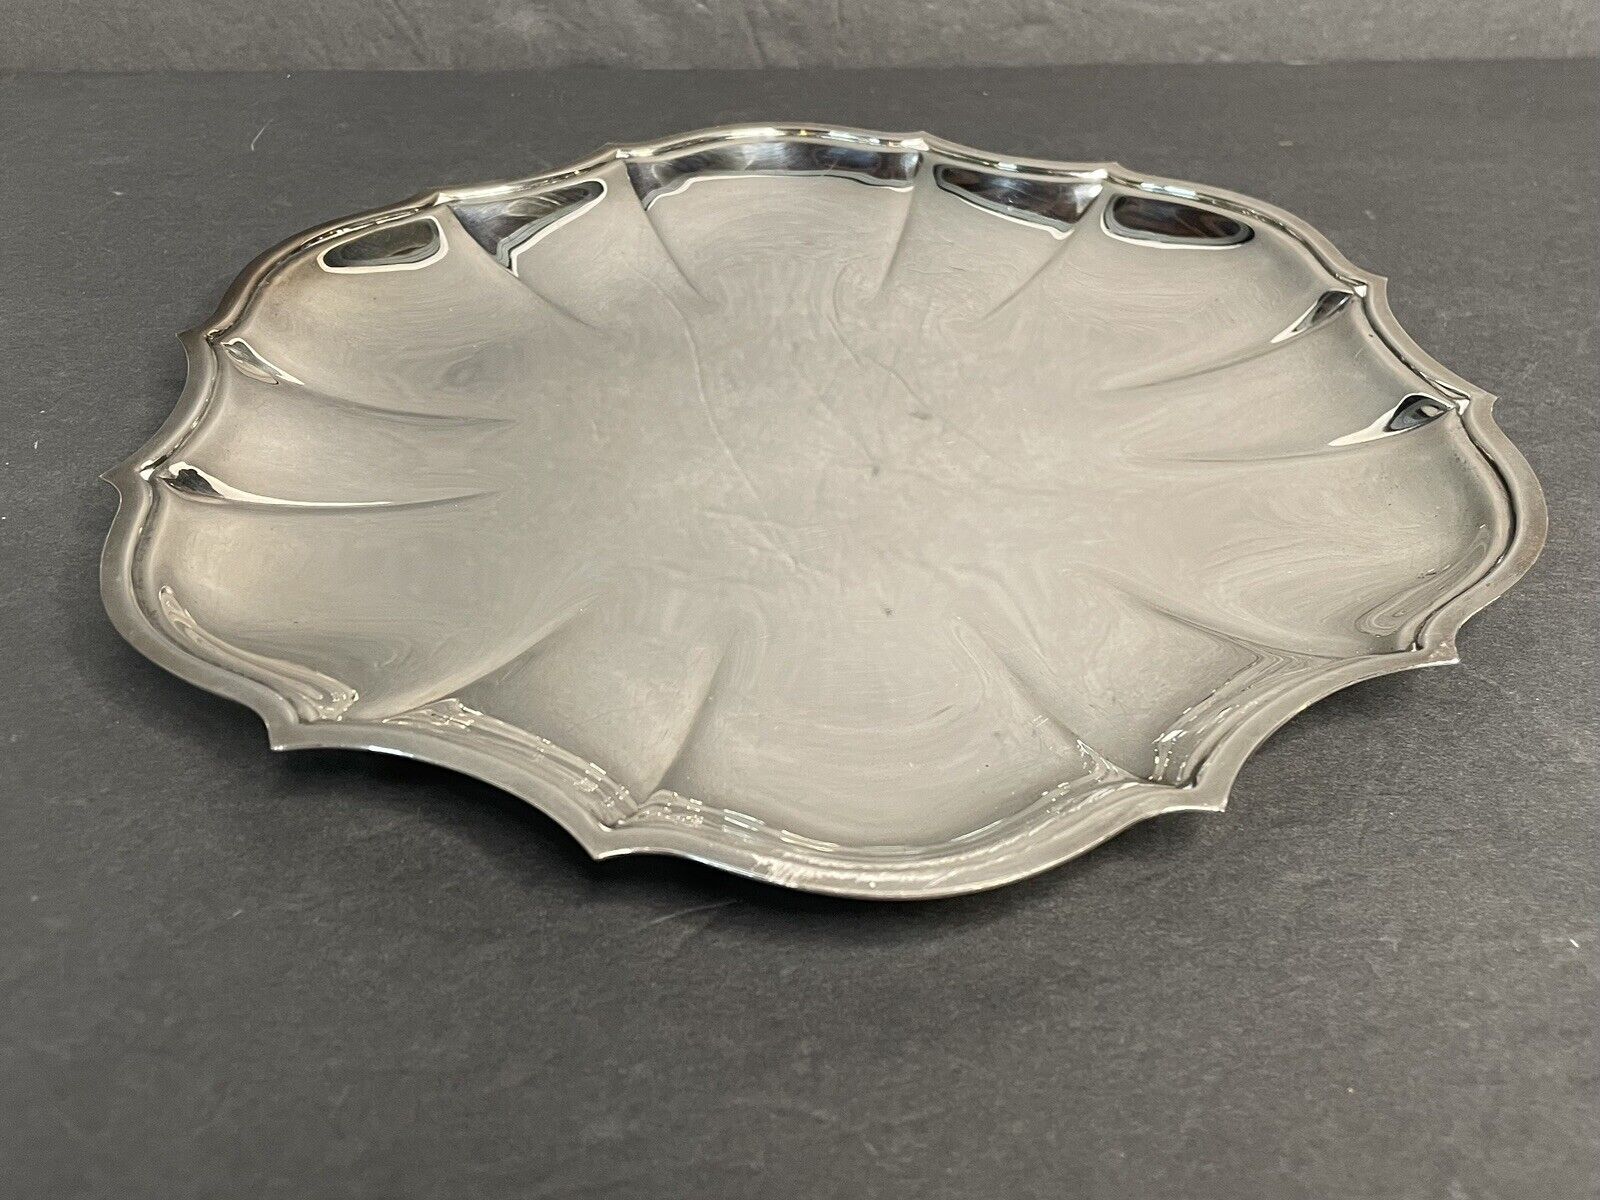 Vintage International Silver Co. Silver Plated Platter Scalloped Edge Inspc. 150